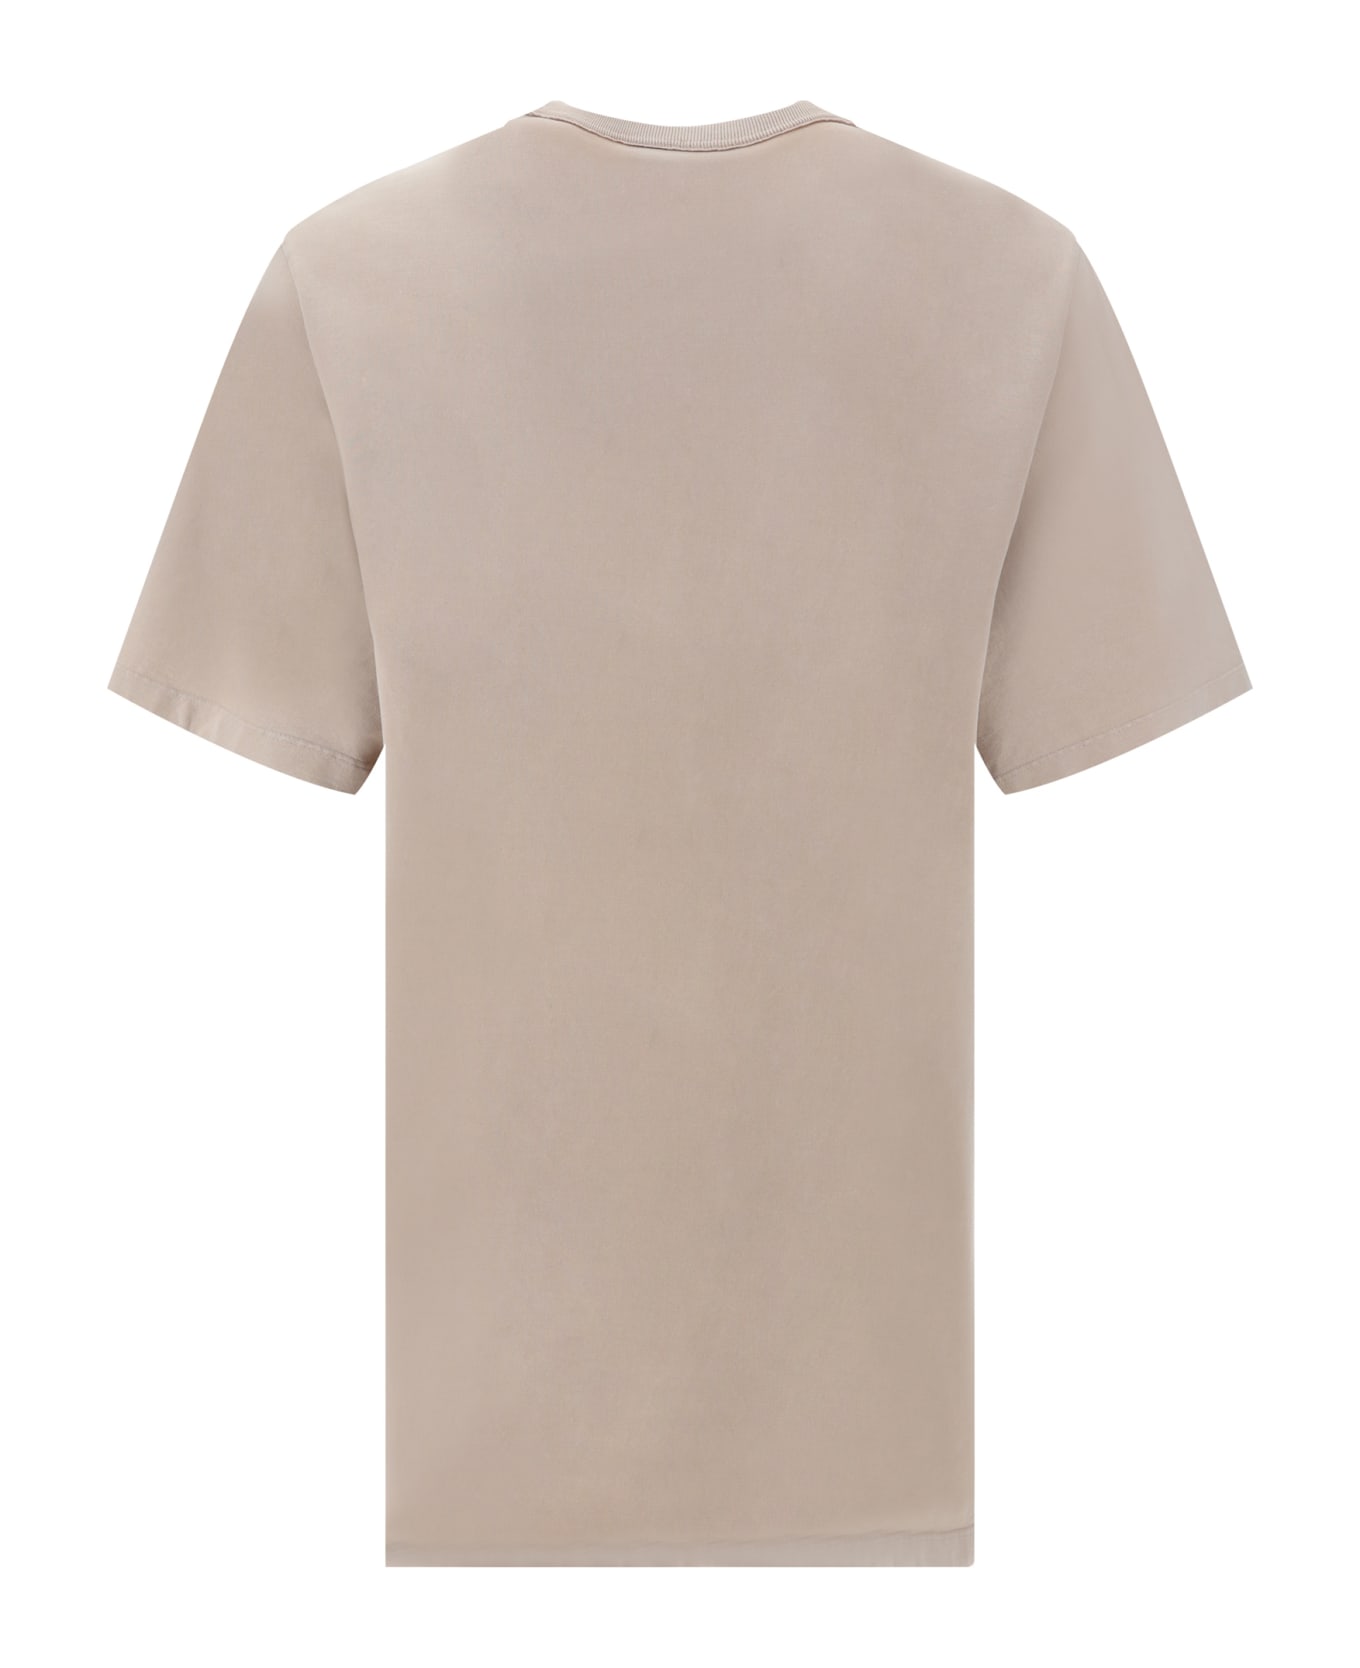 Fendi Washed Compact Jersey T-shirt - Nude & Neutrals